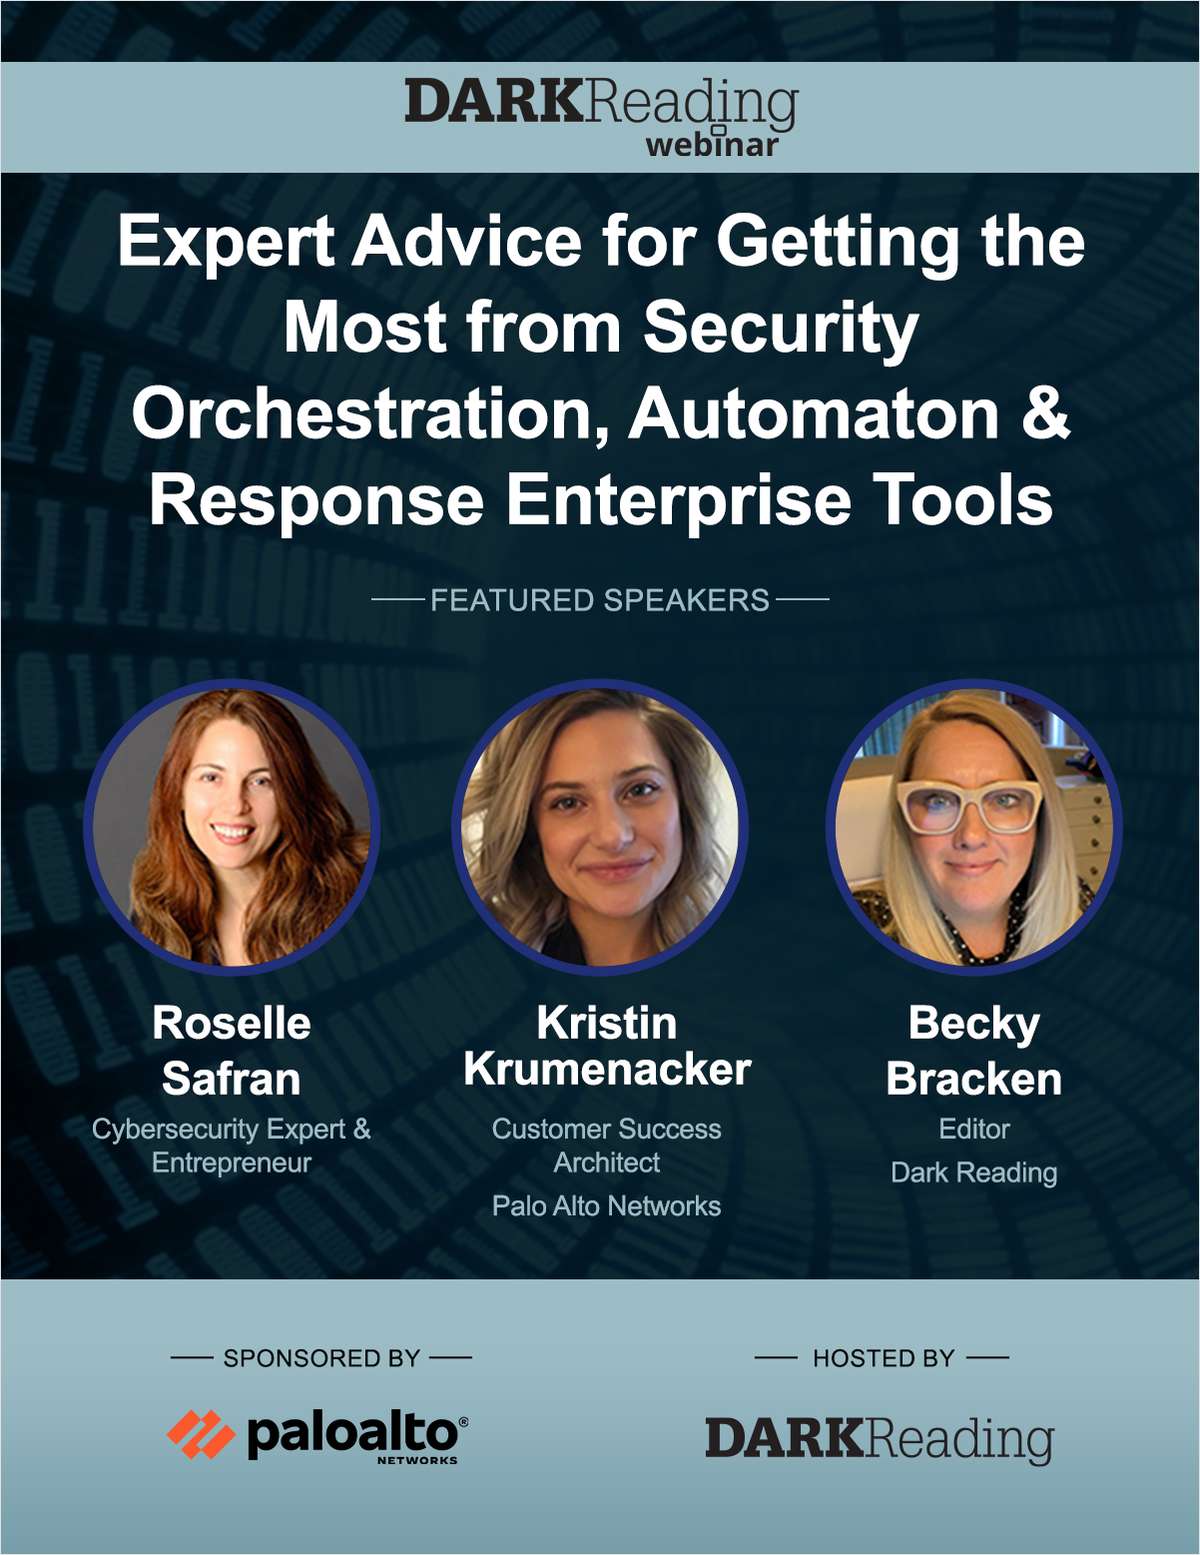 Expert Advice for Getting the Most from Security Orchestration, Automation & Response Enterprise Tools